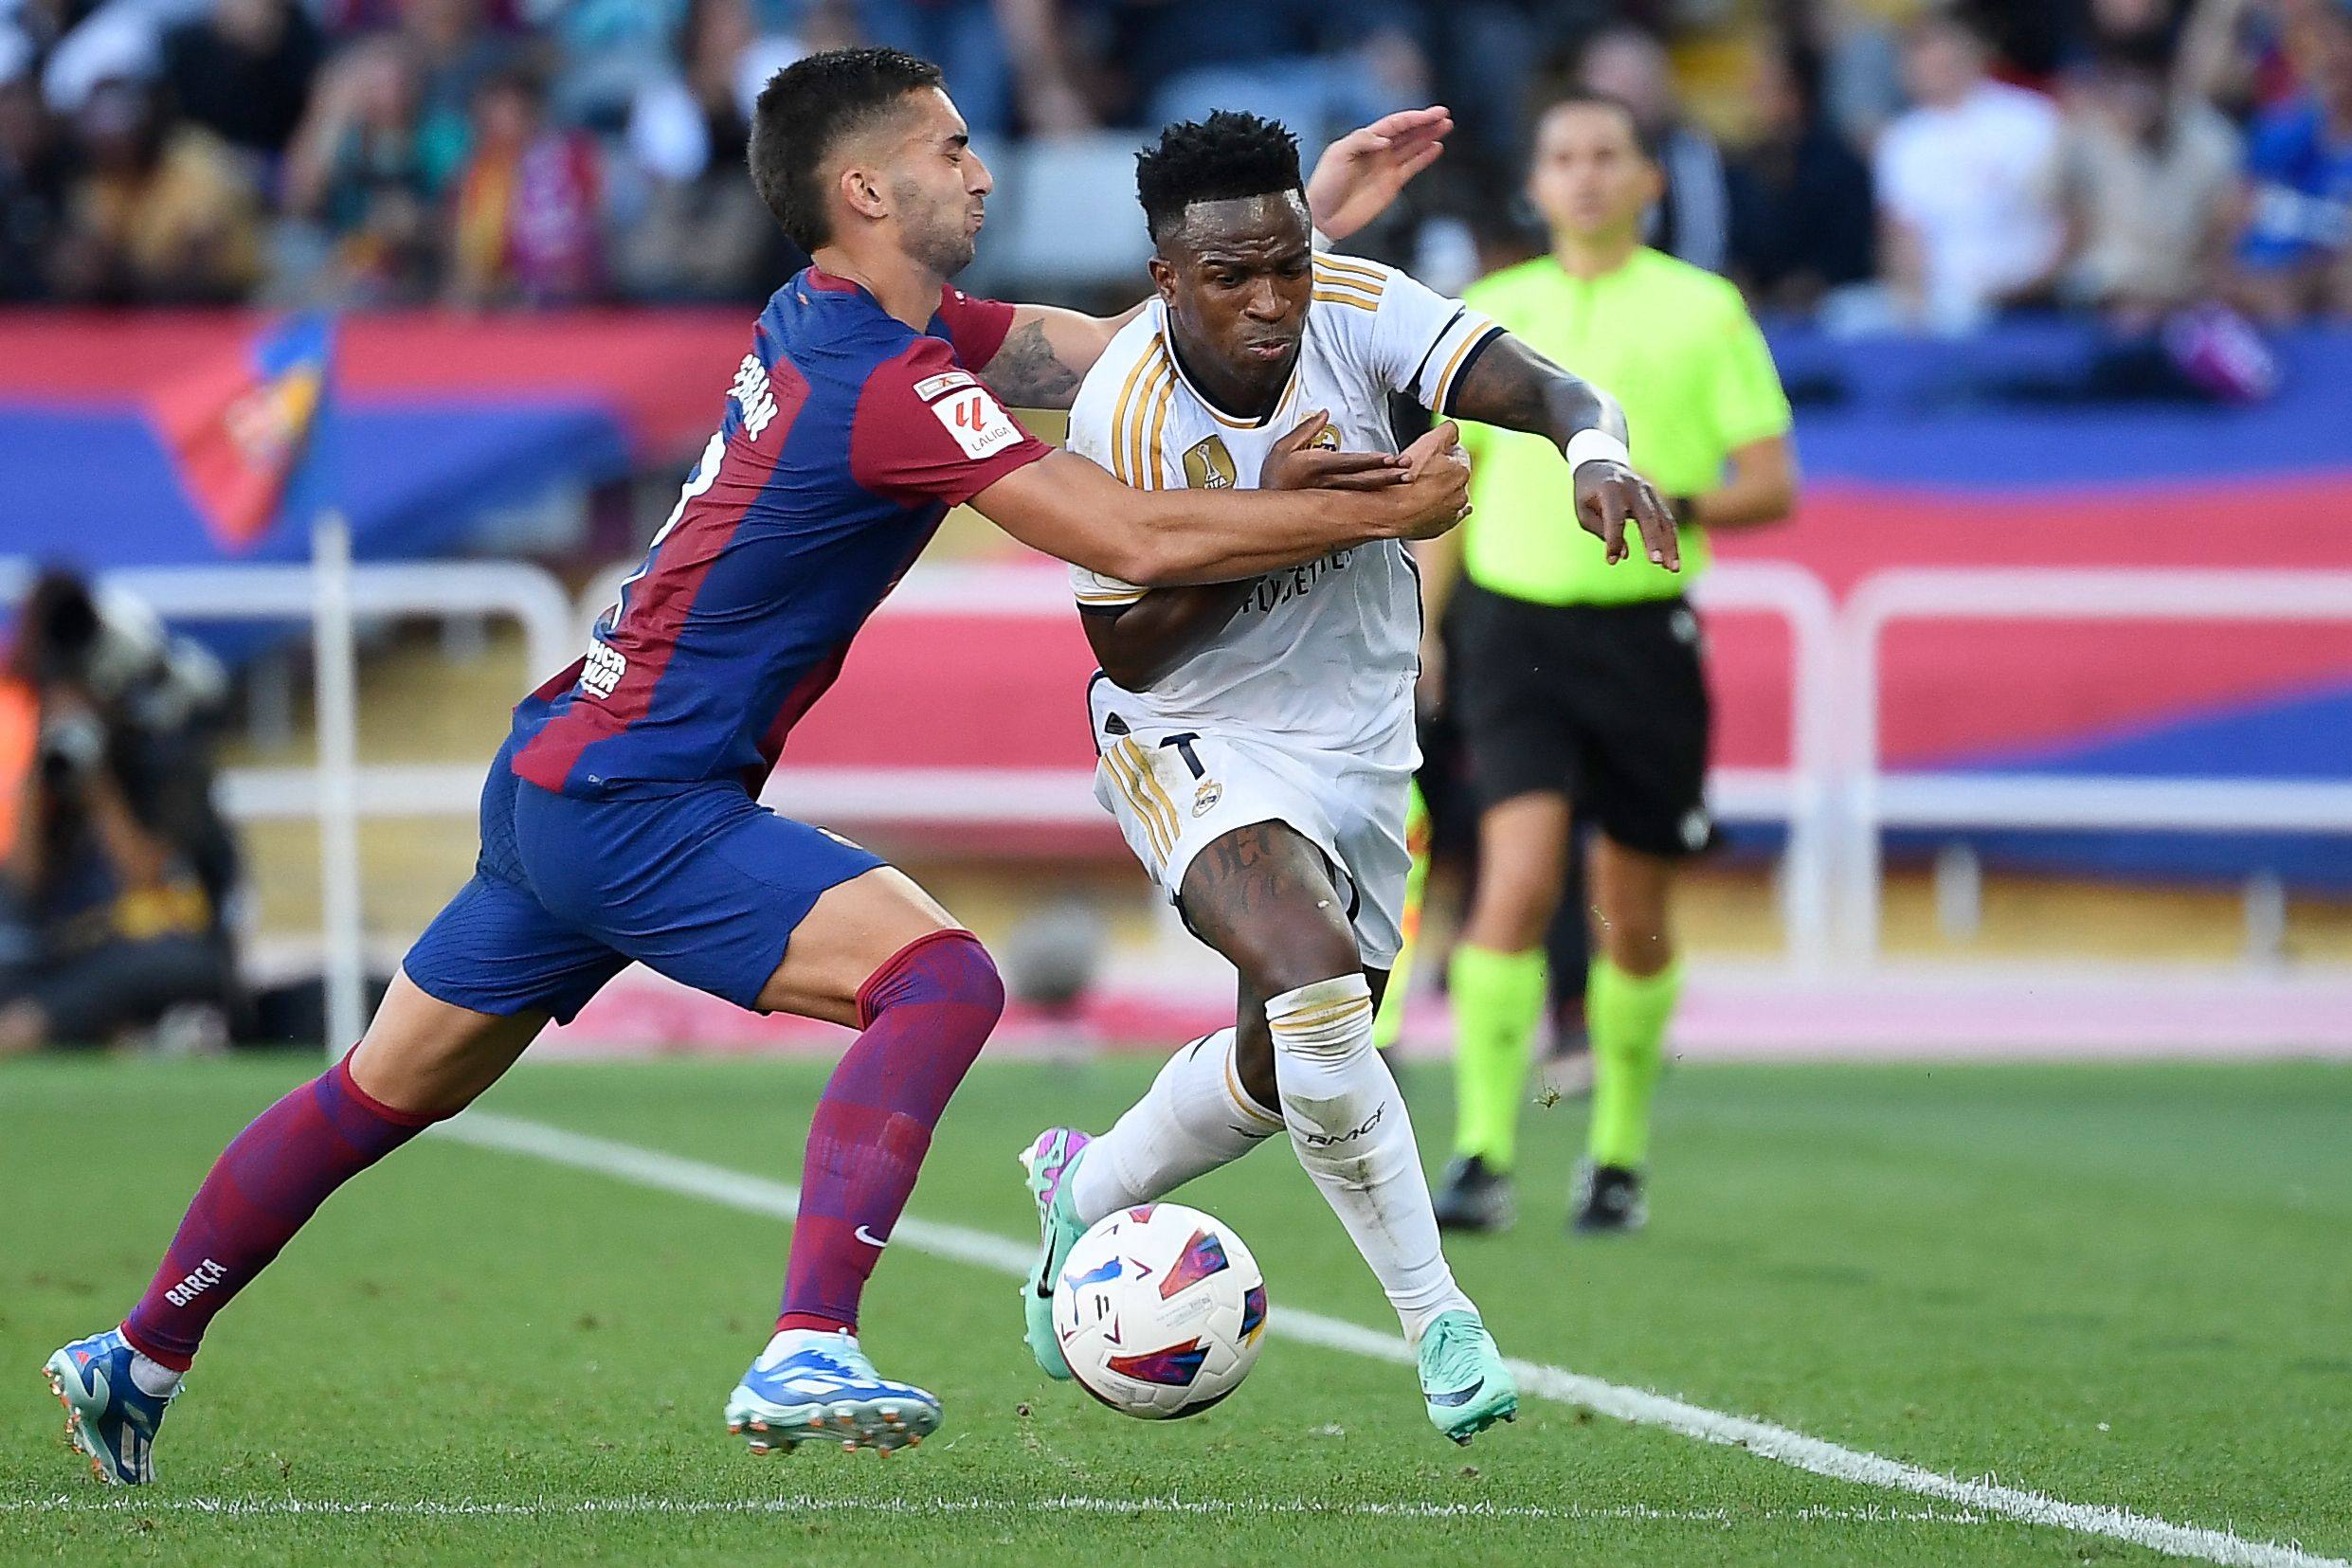 Barcelona’s Spanish forward has reportedly experienced racial abuse during matches multiple times. Photo: AFP